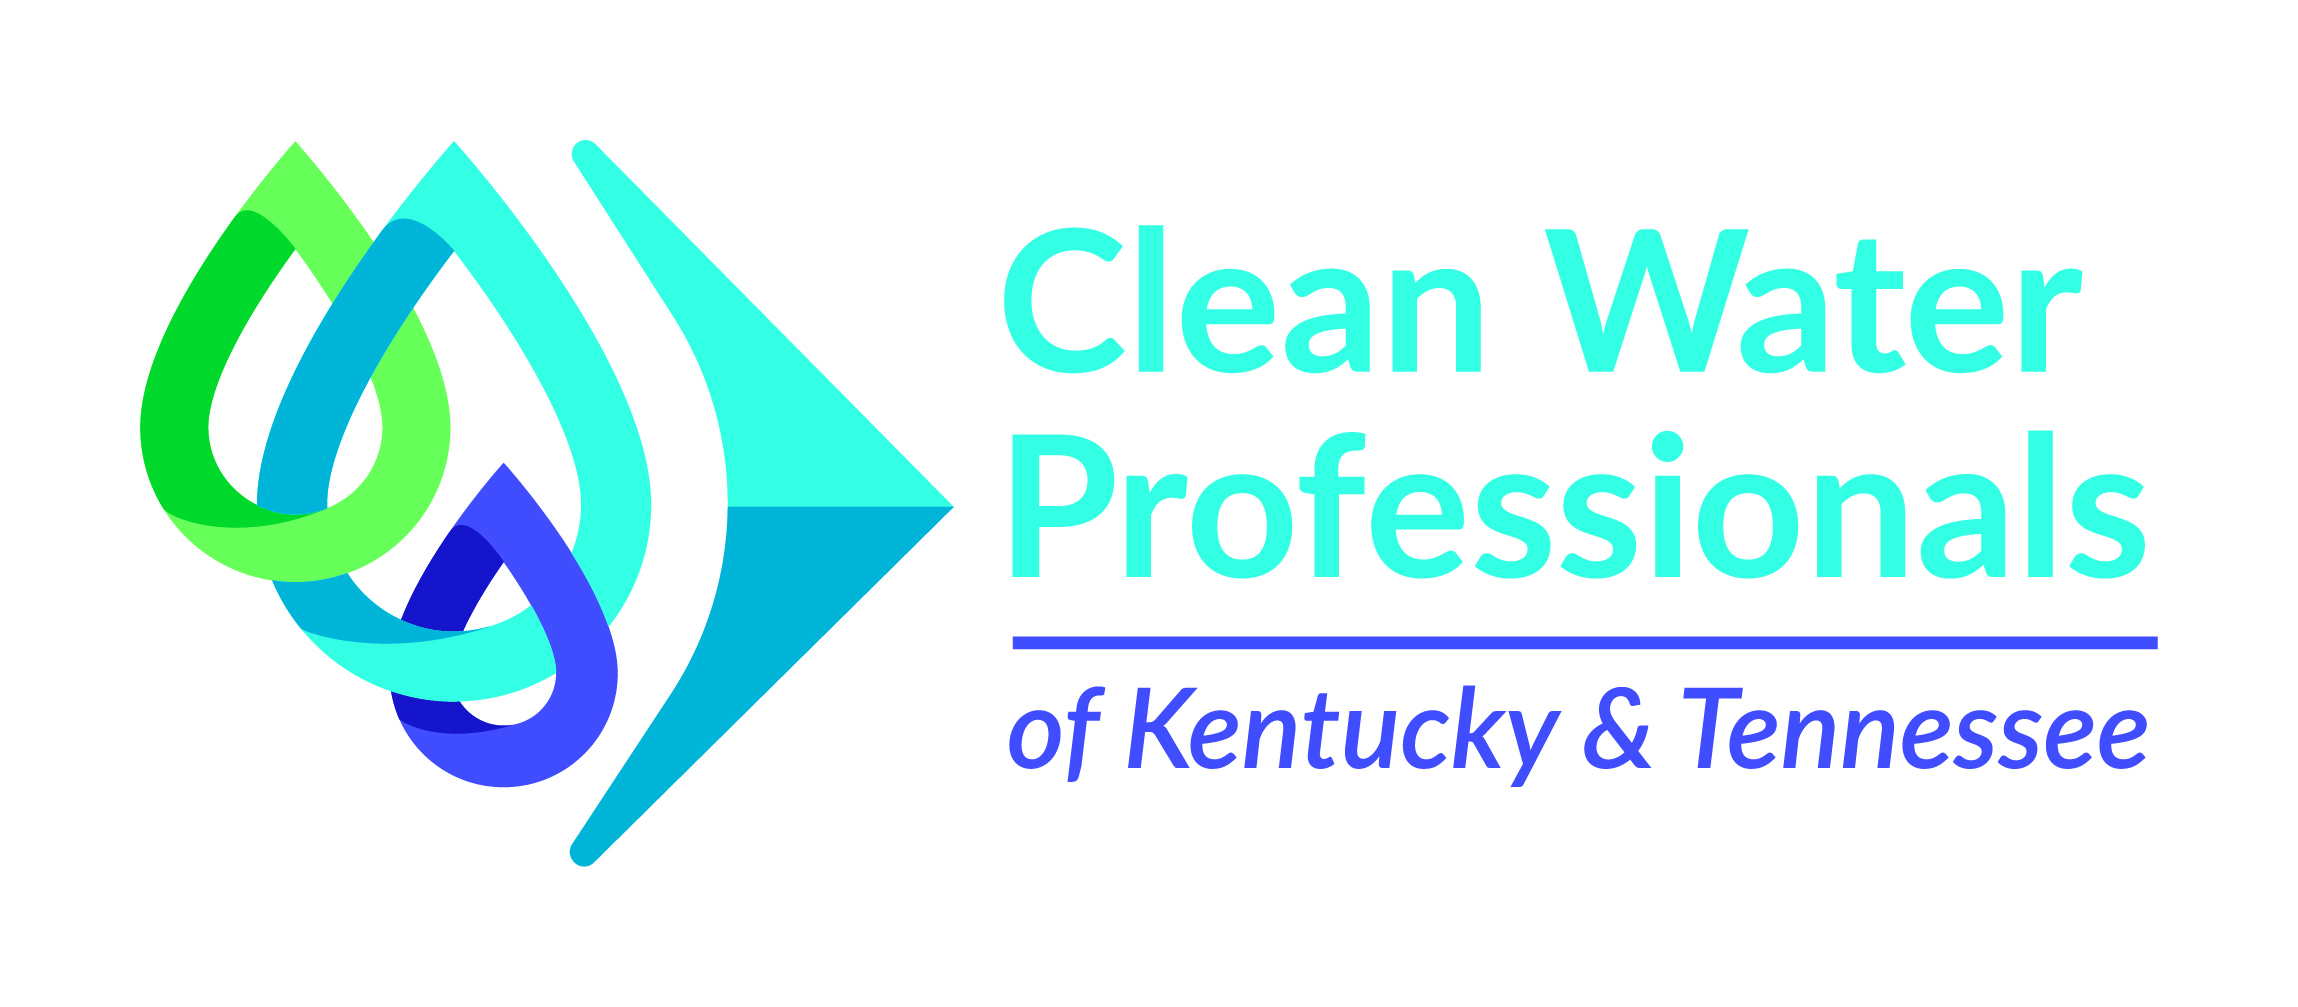 CWP Logos_KYTN Clean Water Professionals of Kentucky & Tennessee